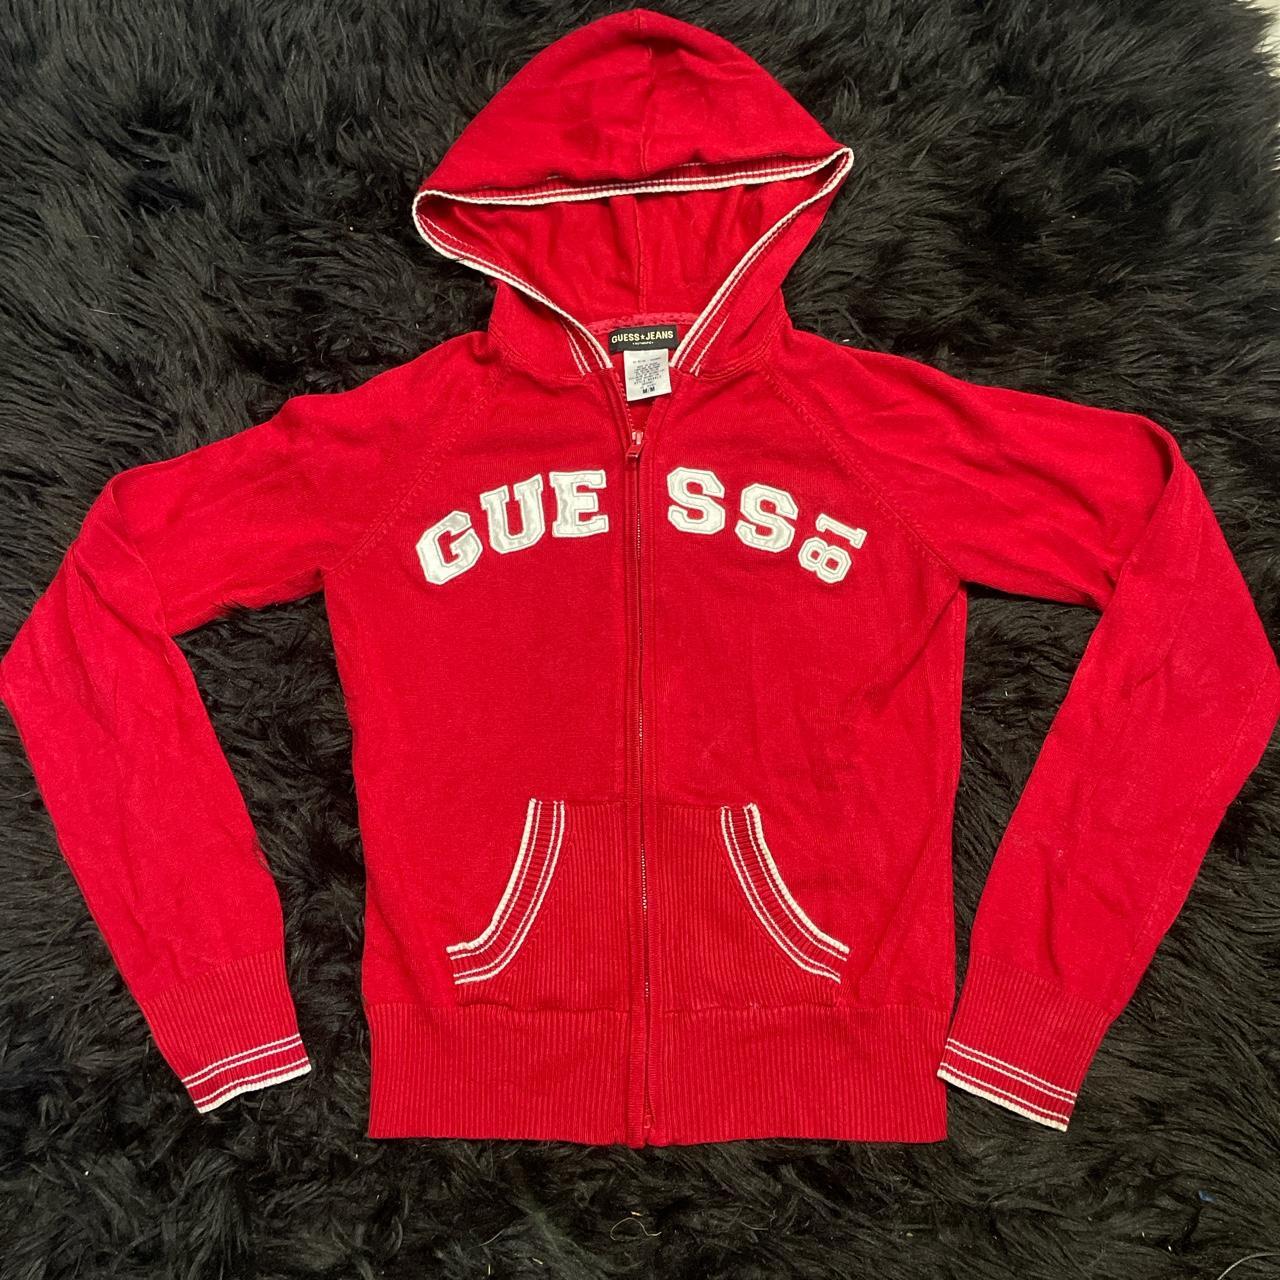 Women's Red and White Jacket | Depop